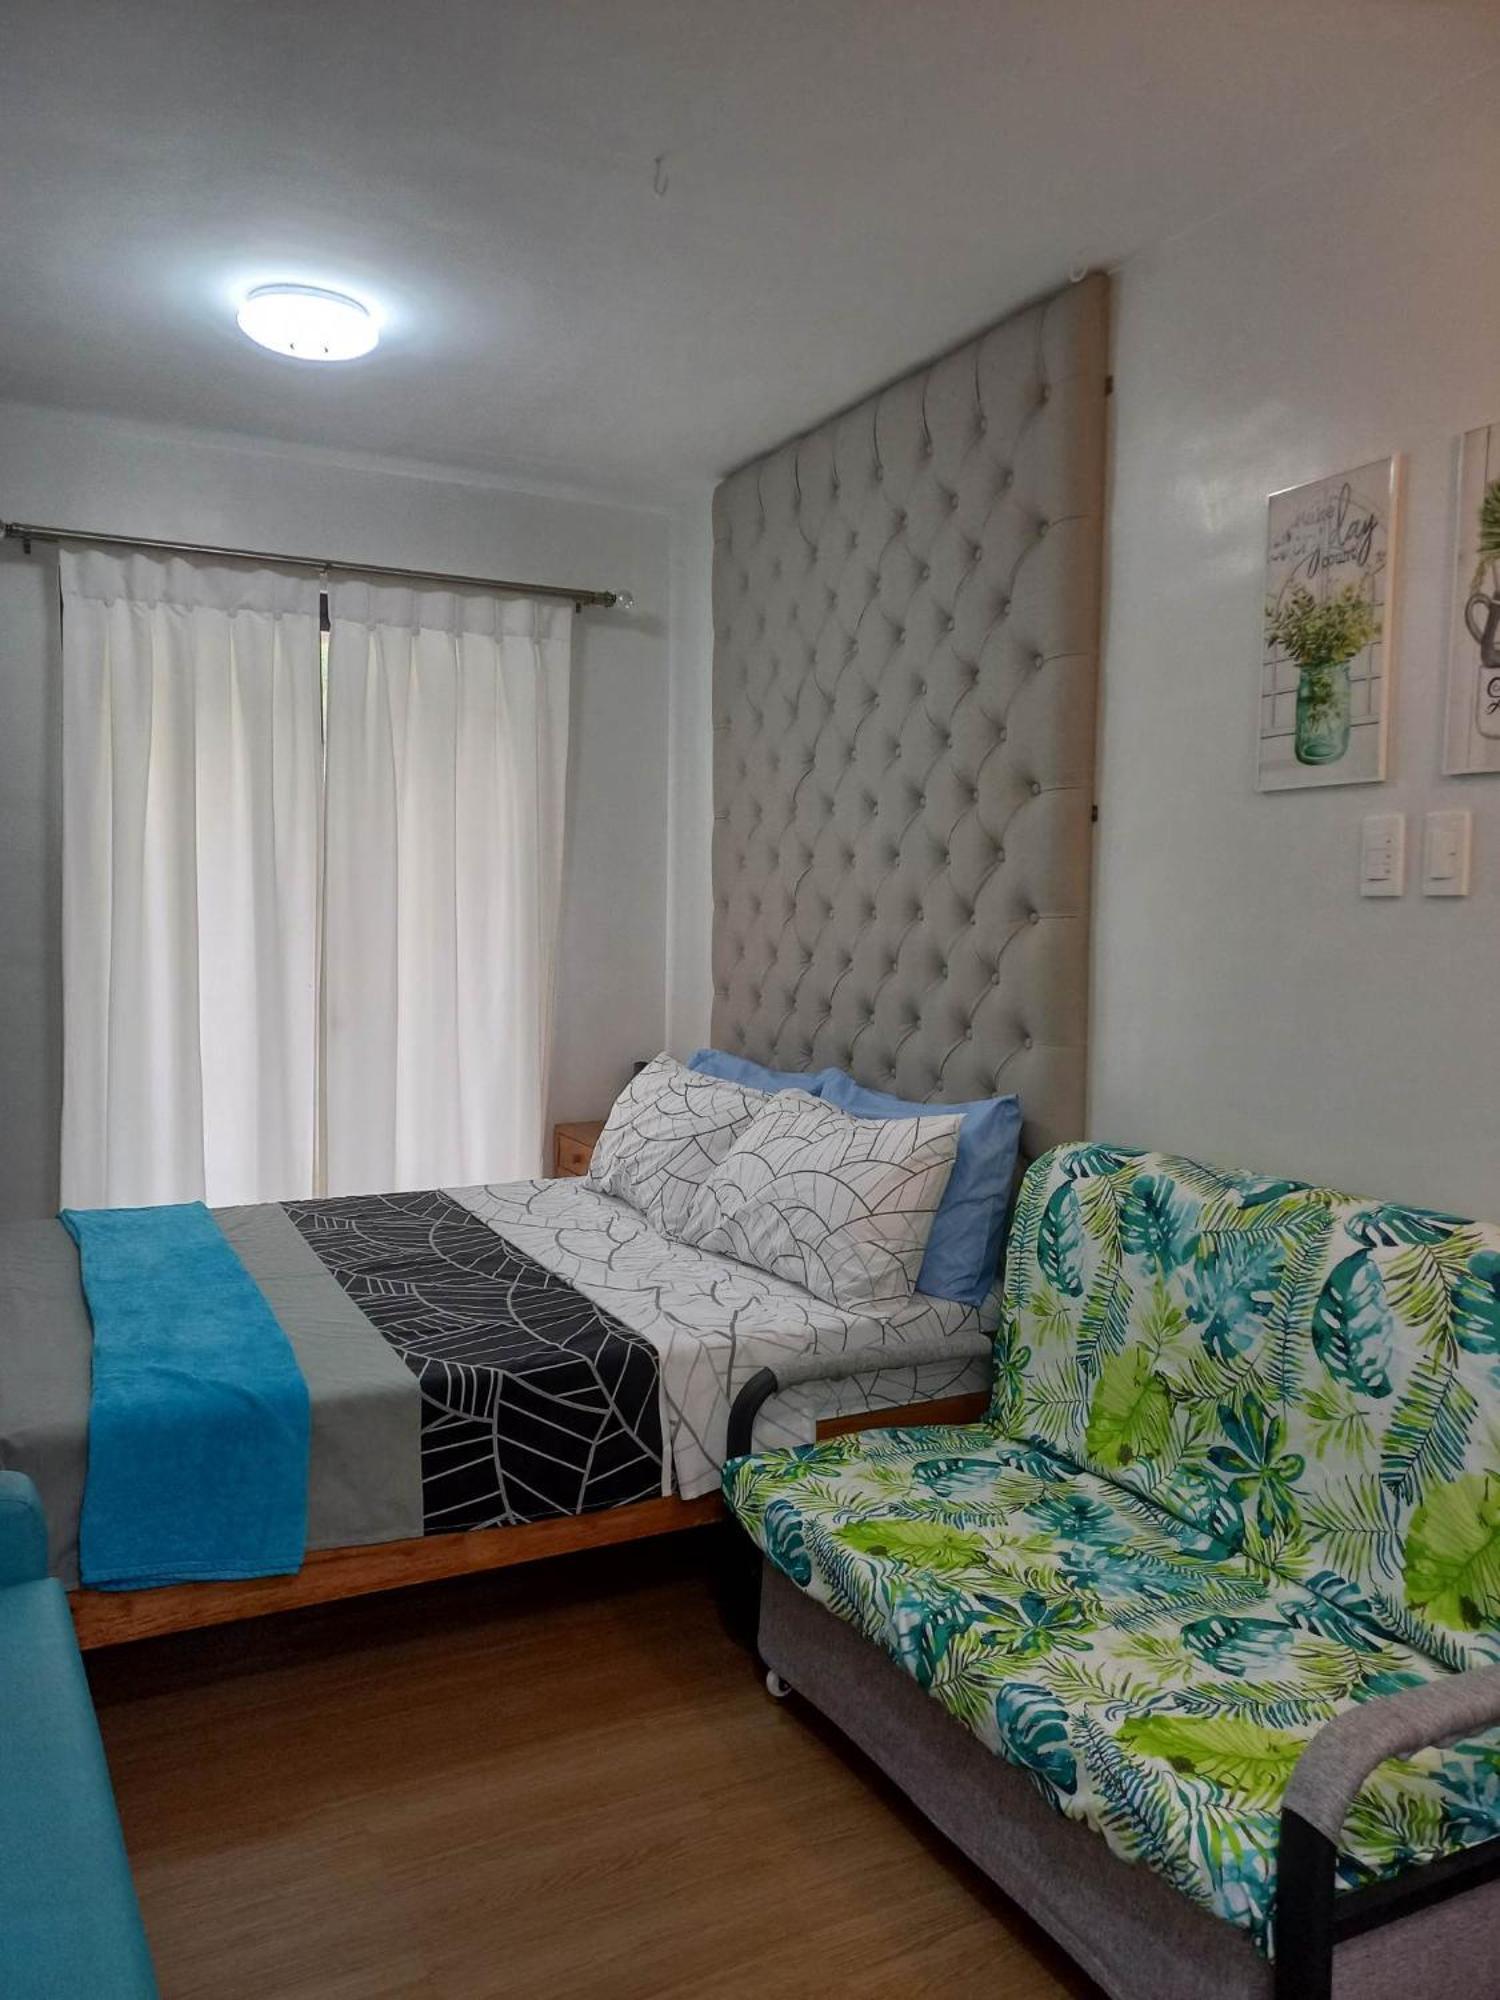 Cozyvilla At Pine Suites Tagaytay 2Br Or Studio With Free Parking Tagaytay City Extérieur photo